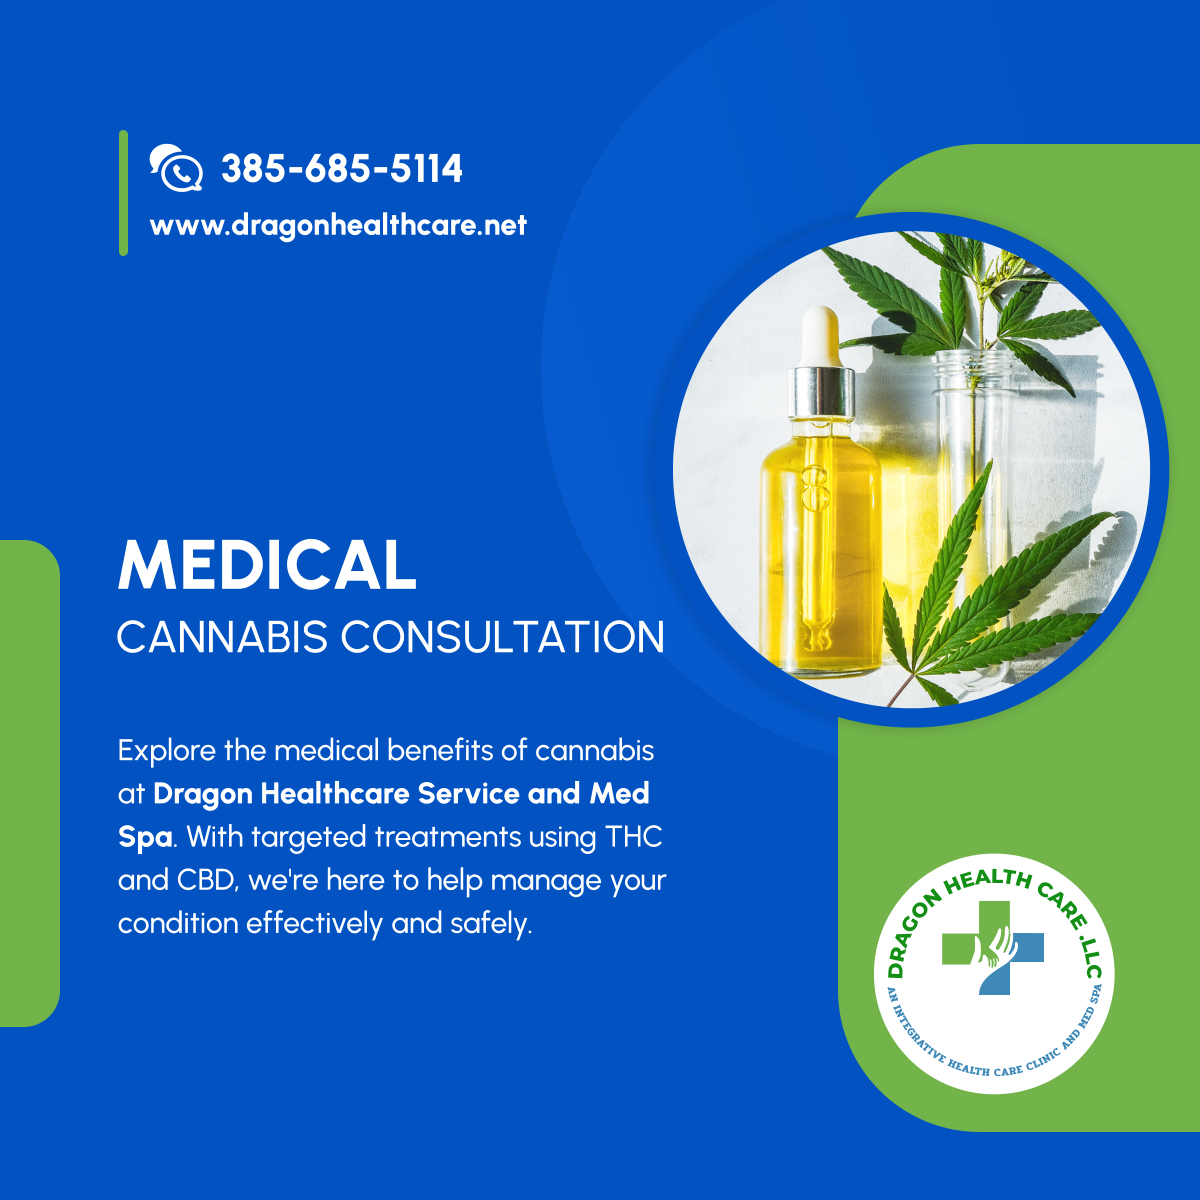 Are you exploring the benefits of medical cannabis? Our specialists provide the insight and care you need, explaining the benefits of THC and CBD for your health. Reach out to us now! 

#MillcreekUT #HealthcareClinicAndMedicalSpa #MedicalCannabis